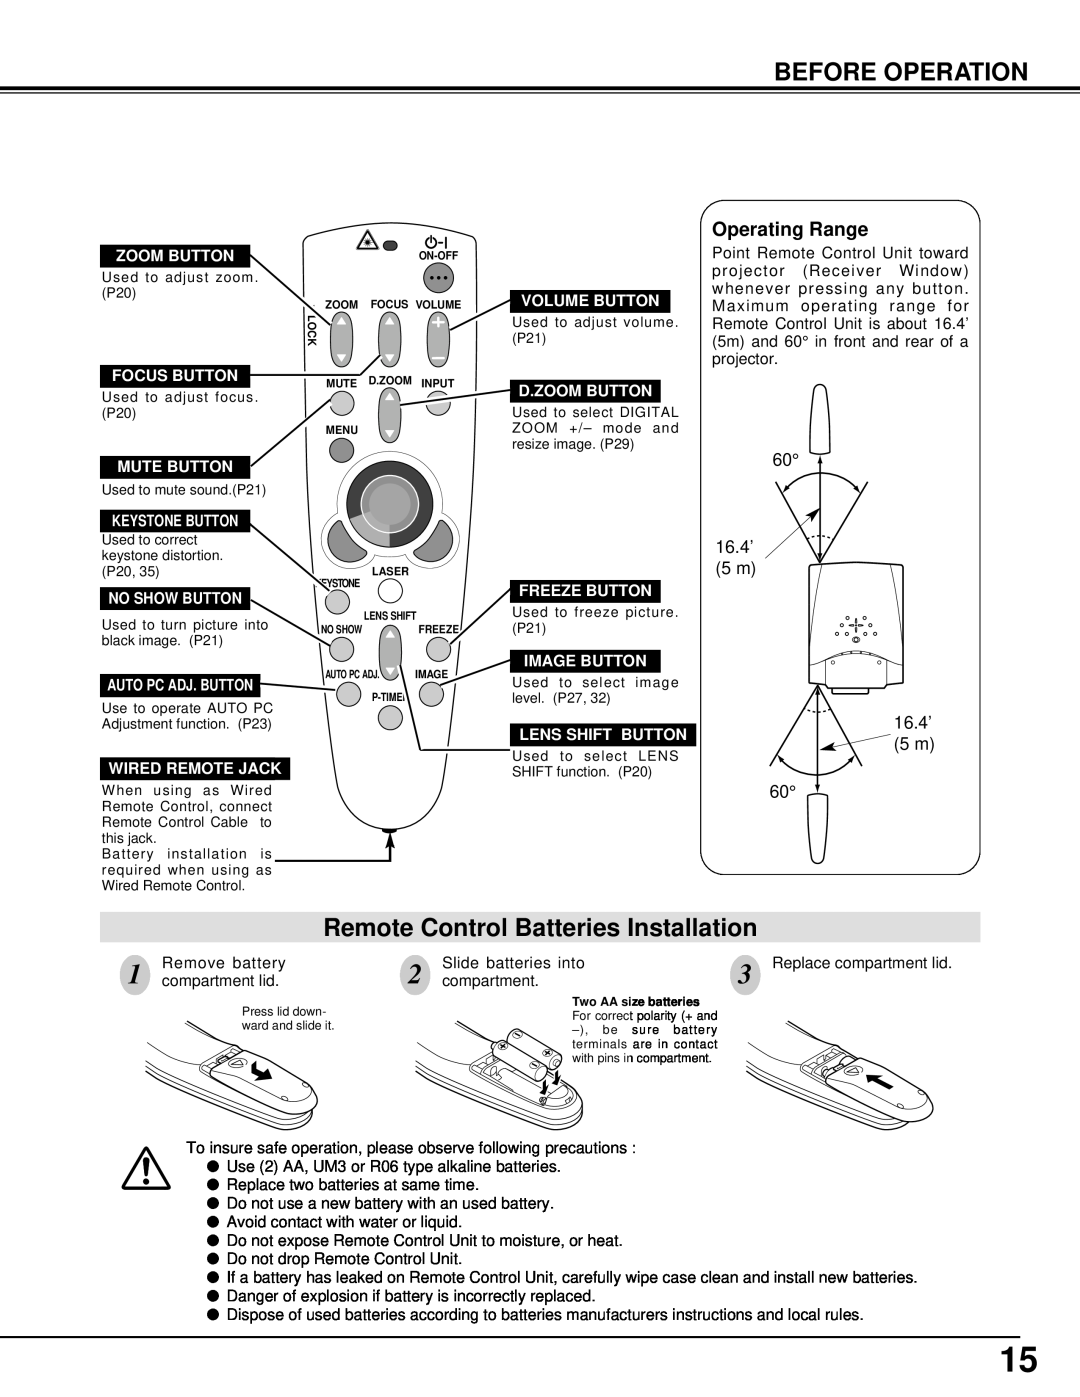 Eiki LC-X986 instruction manual Before Operation, Remote Control Batteries Installation, Operating Range 